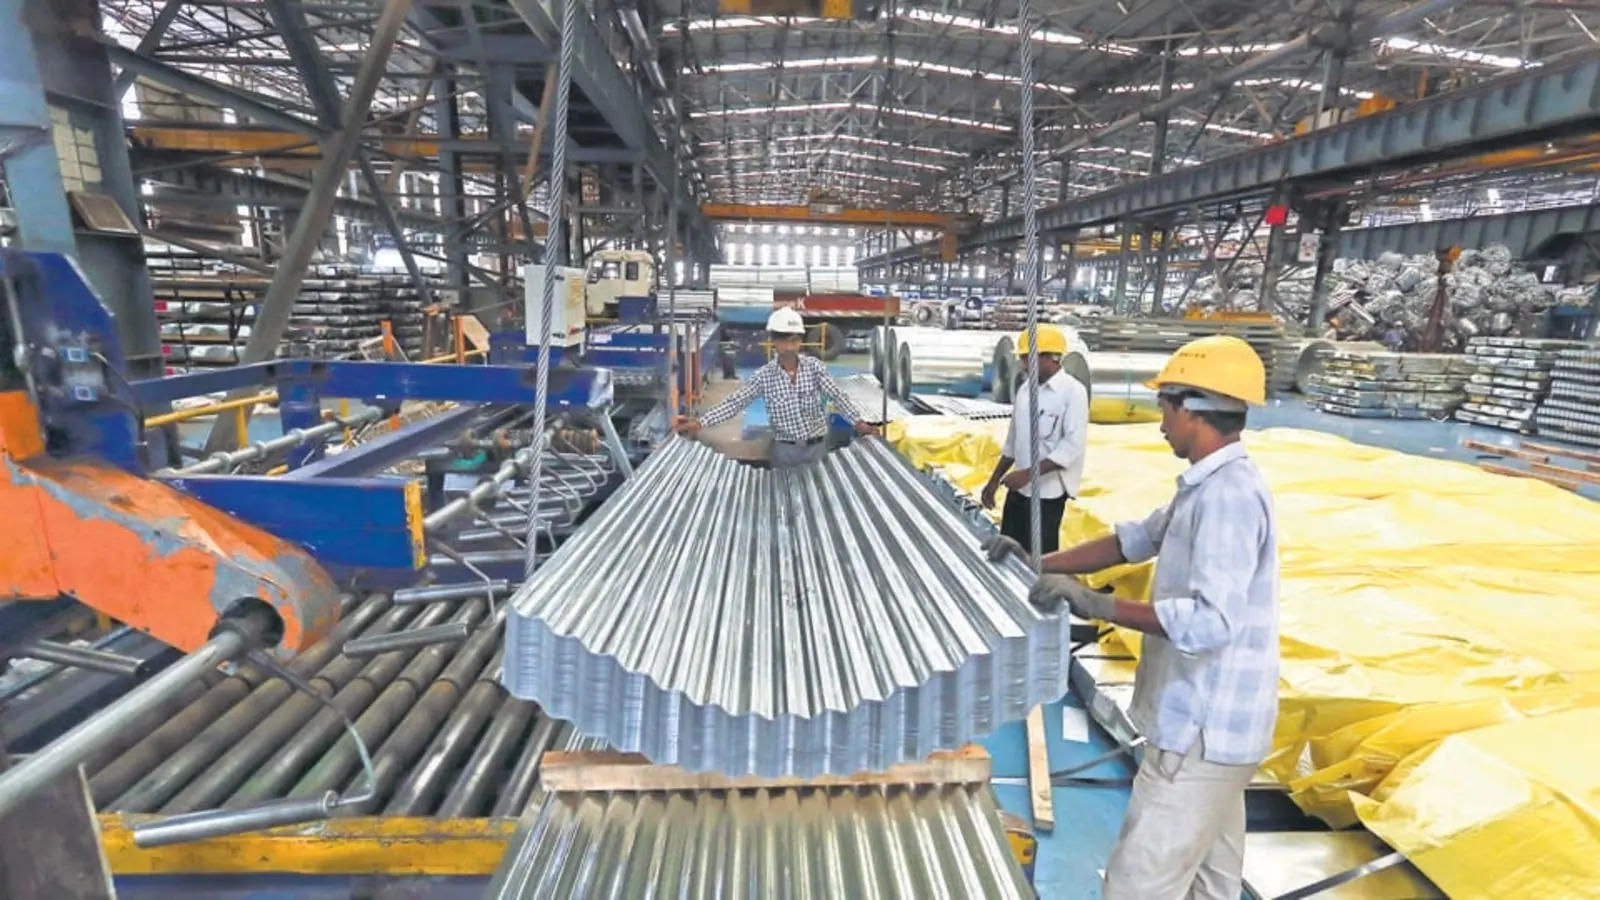 Core sector output in April shows robust growth of 8.4%